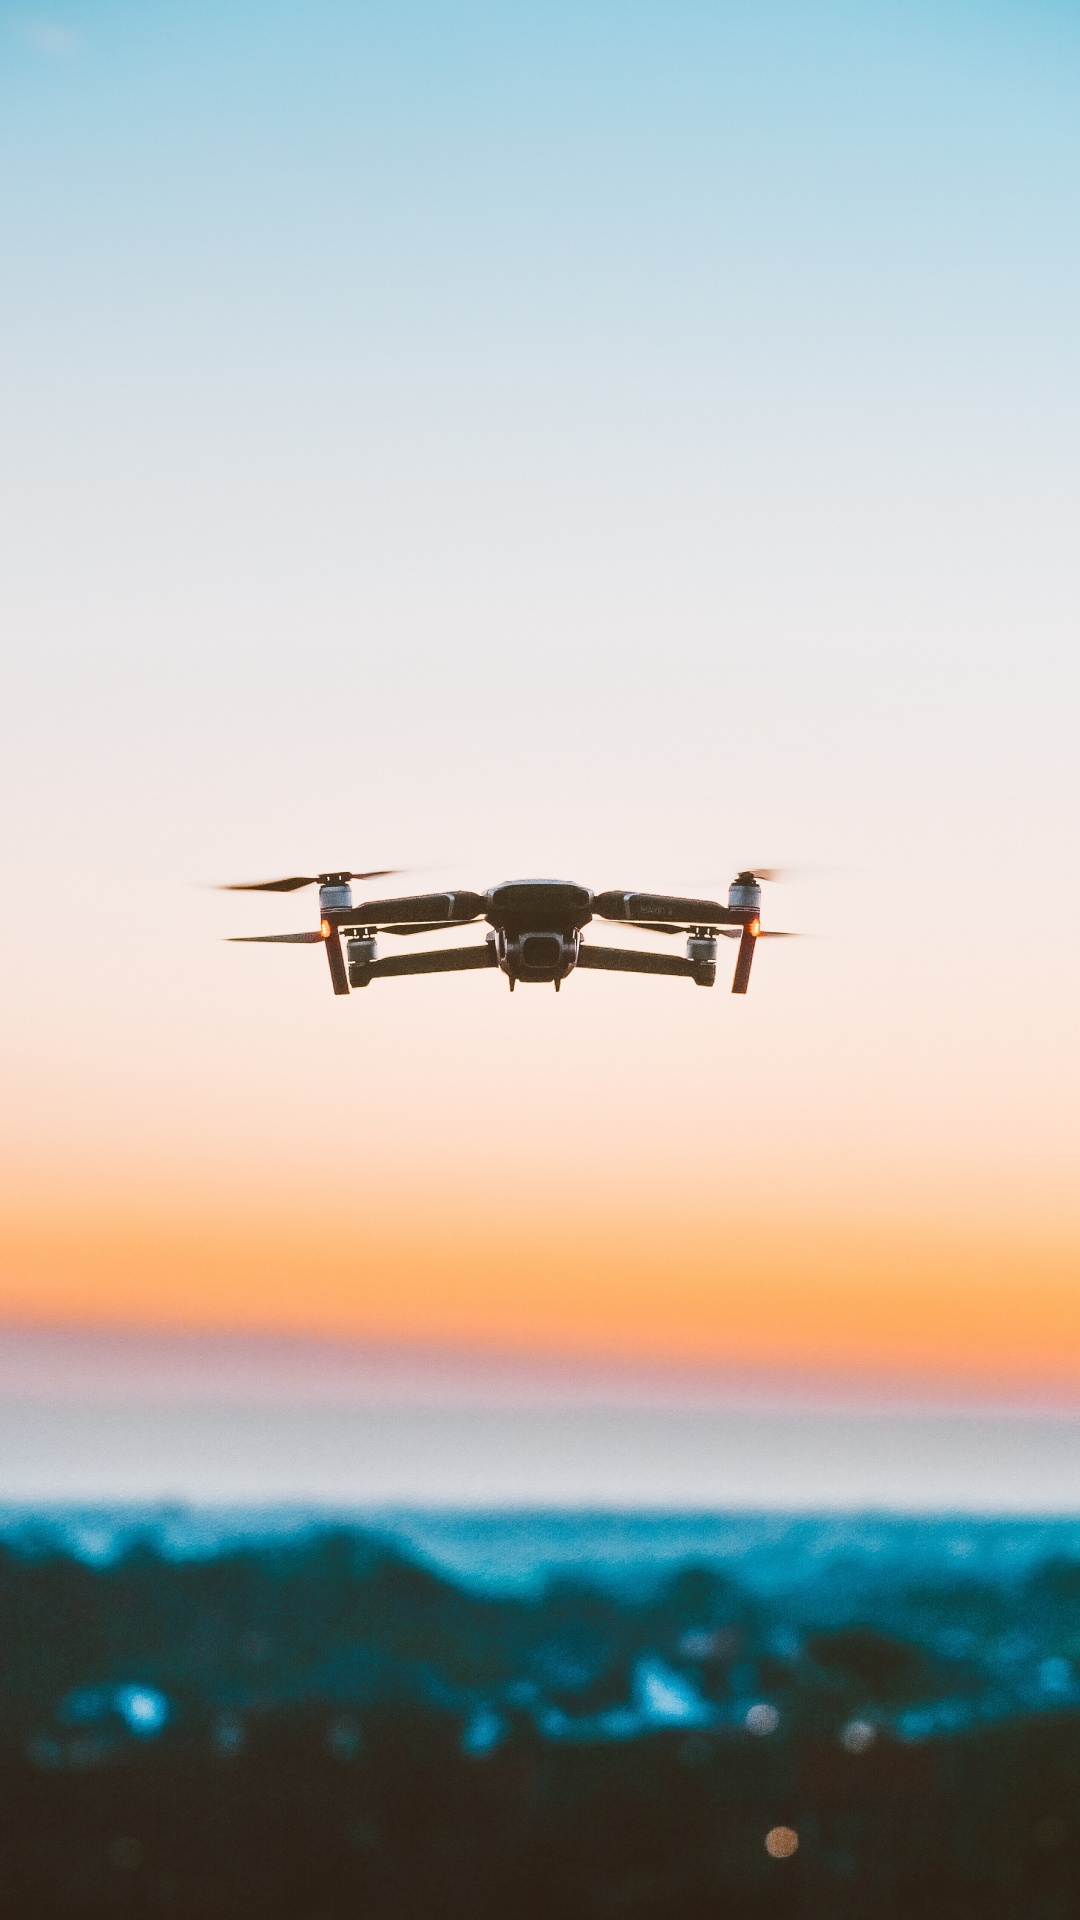 Black Drone Flying Over The Sea During Sunset. Wallpaper in 1080x1920 Resolution